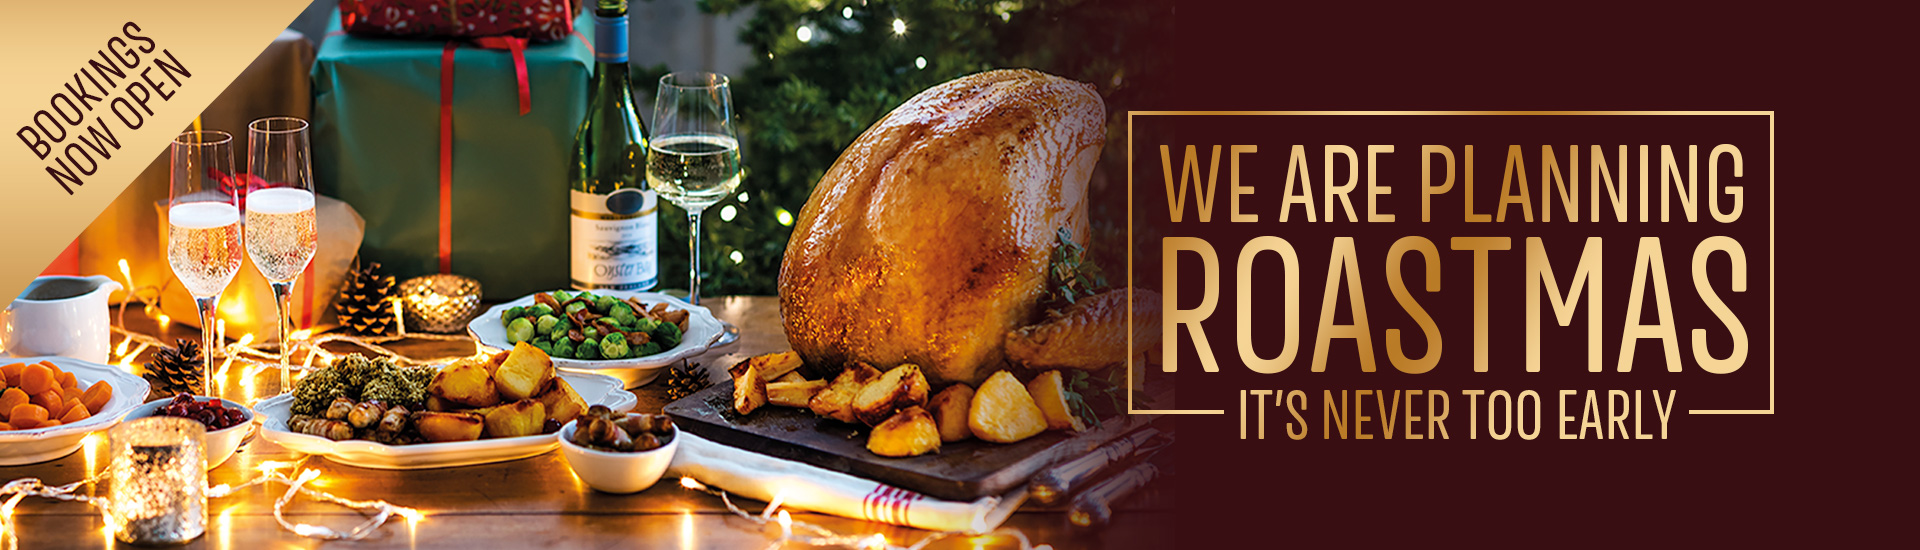 Christmas 2022 at your local Toby Carvery Hilsea | Home of the Roast